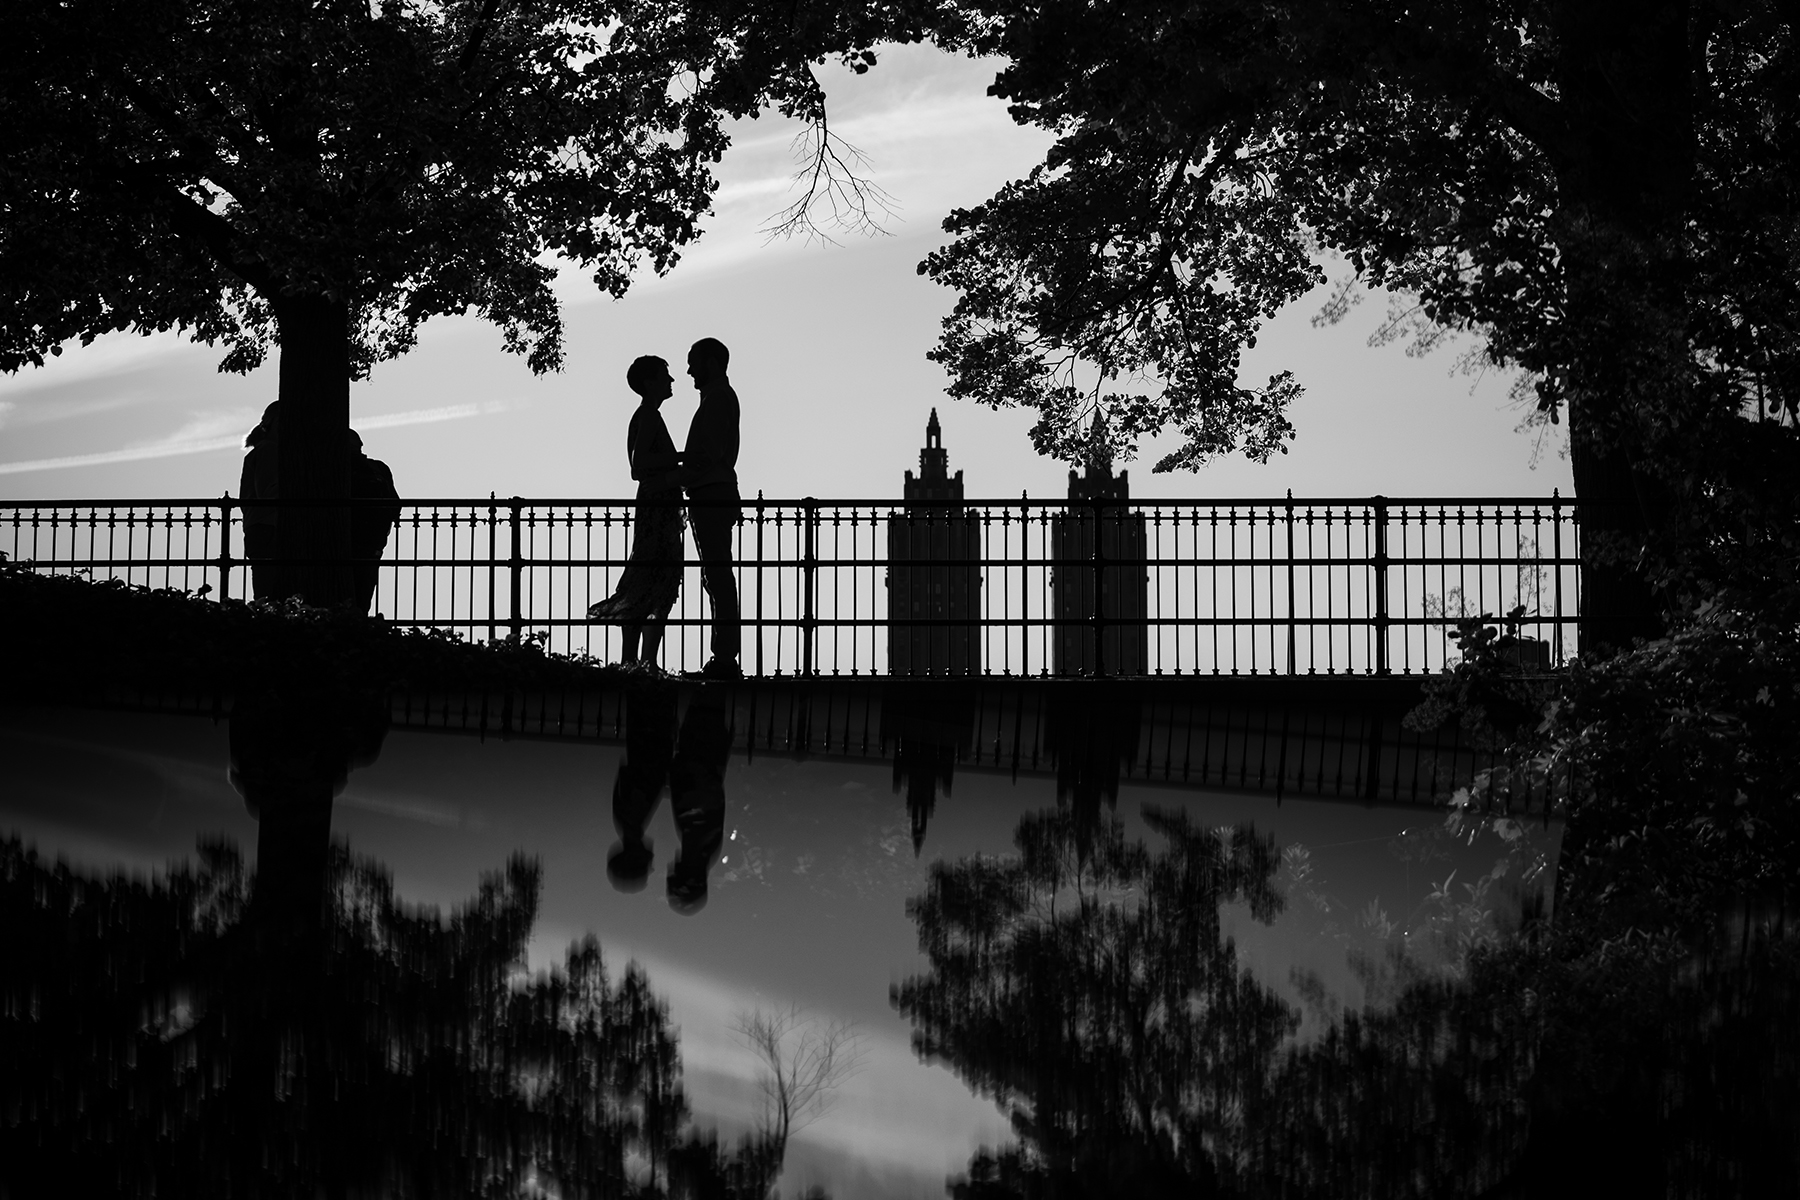 Silhouetted couple standing on a bridge surrounded by trees, with a city skyline in the background and their reflection visible in a body of water below—an idyllic scene perfect for choosing a location for your engagement photos.